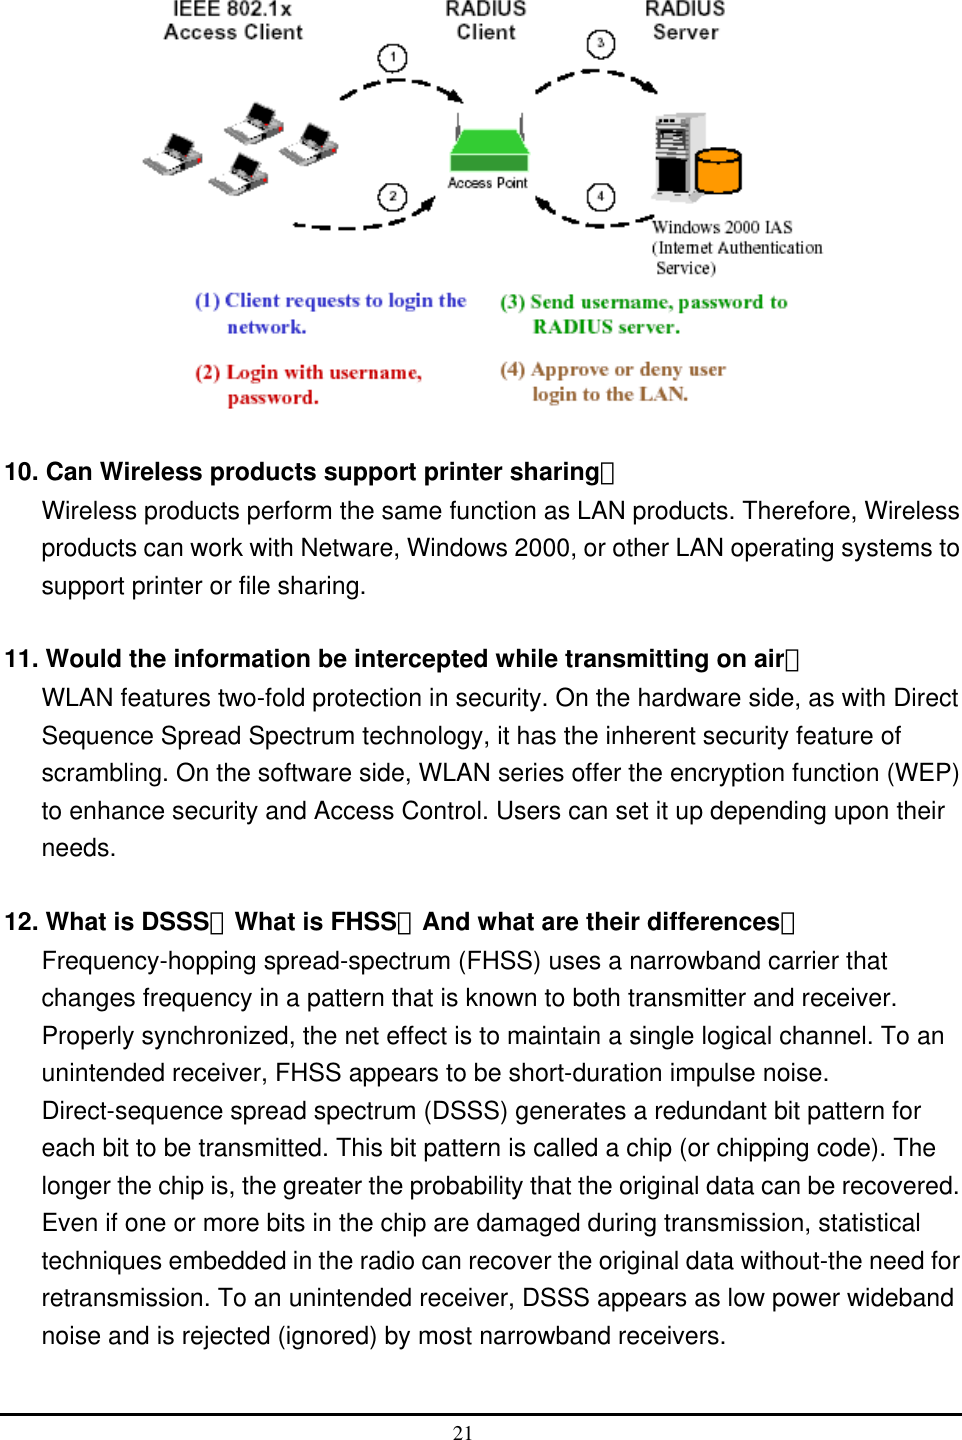   10. Can Wireless products support printer sharing？ Wireless products perform the same function as LAN products. Therefore, Wireless products can work with Netware, Windows 2000, or other LAN operating systems to support printer or file sharing.  11. Would the information be intercepted while transmitting on air？ WLAN features two-fold protection in security. On the hardware side, as with Direct Sequence Spread Spectrum technology, it has the inherent security feature of scrambling. On the software side, WLAN series offer the encryption function (WEP) to enhance security and Access Control. Users can set it up depending upon their needs.  12. What is DSSS？What is FHSS？And what are their differences？ Frequency-hopping spread-spectrum (FHSS) uses a narrowband carrier that changes frequency in a pattern that is known to both transmitter and receiver. Properly synchronized, the net effect is to maintain a single logical channel. To an unintended receiver, FHSS appears to be short-duration impulse noise. Direct-sequence spread spectrum (DSSS) generates a redundant bit pattern for each bit to be transmitted. This bit pattern is called a chip (or chipping code). The longer the chip is, the greater the probability that the original data can be recovered. Even if one or more bits in the chip are damaged during transmission, statistical techniques embedded in the radio can recover the original data without-the need for retransmission. To an unintended receiver, DSSS appears as low power wideband noise and is rejected (ignored) by most narrowband receivers.  21  